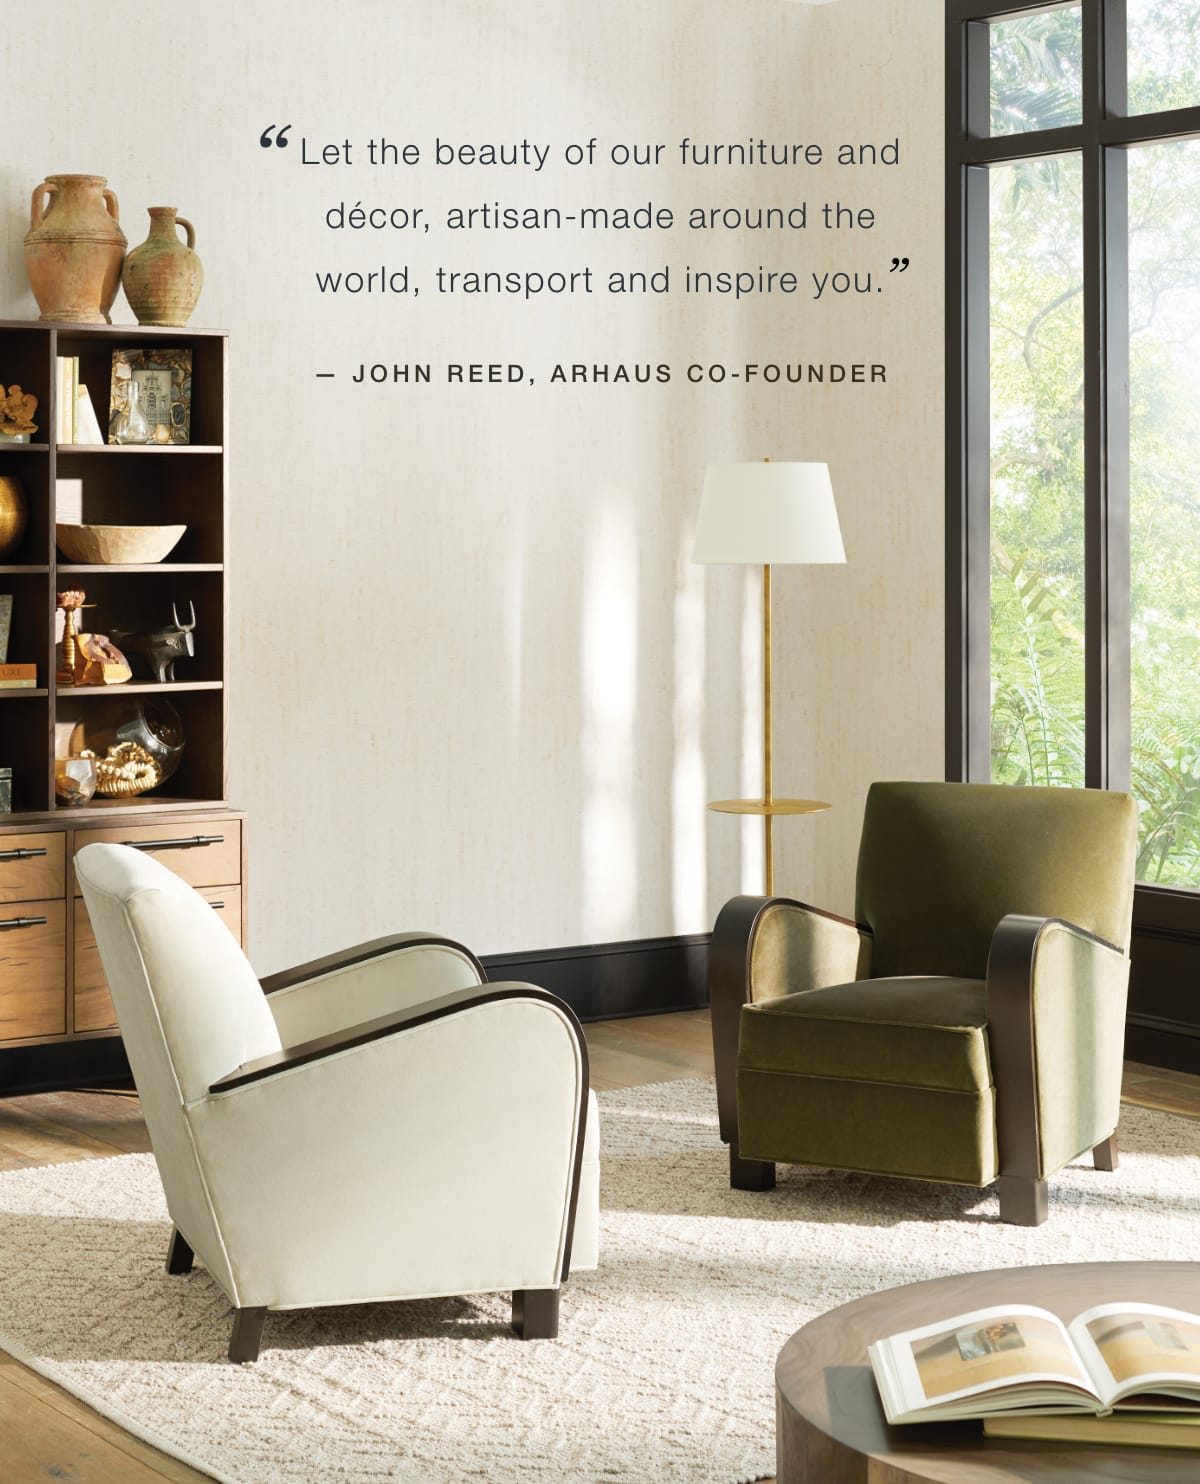 "Let the beauty of our furniture and decor, artisan-made around the world, transport and inspire you" - John Reed, Arhaus Co-Founder